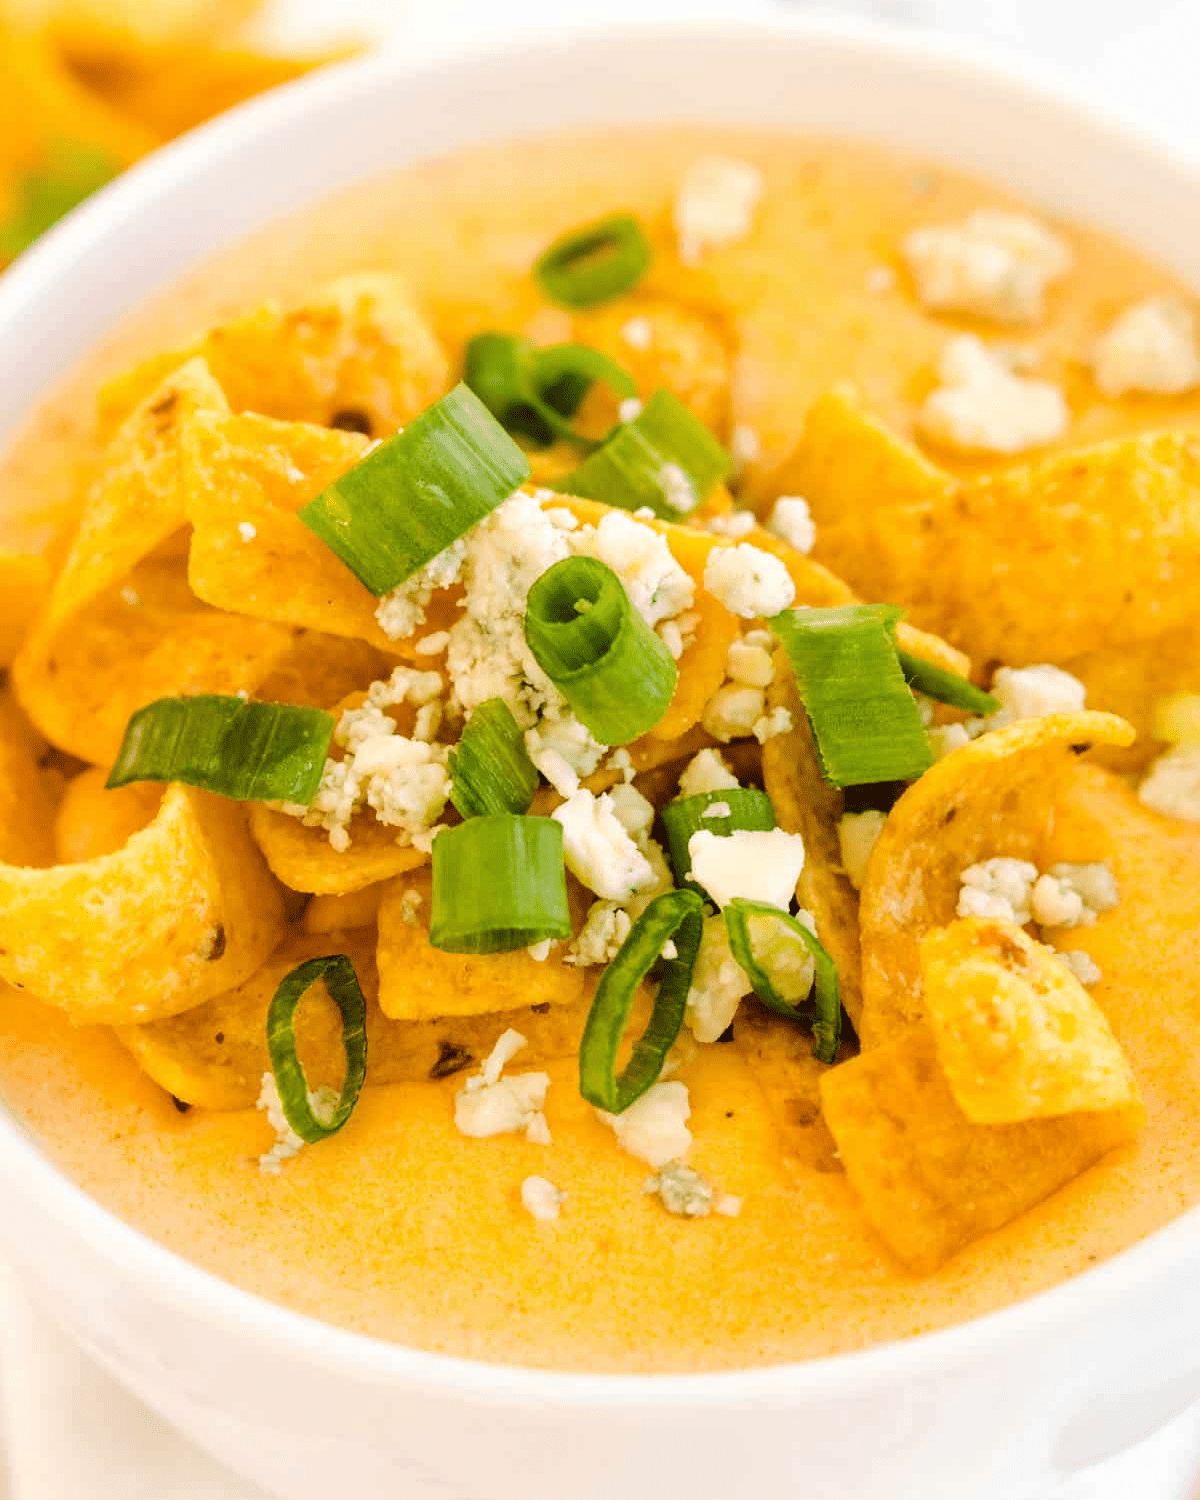 Buffalo chicken soup with fritos and green onions in a white bowl